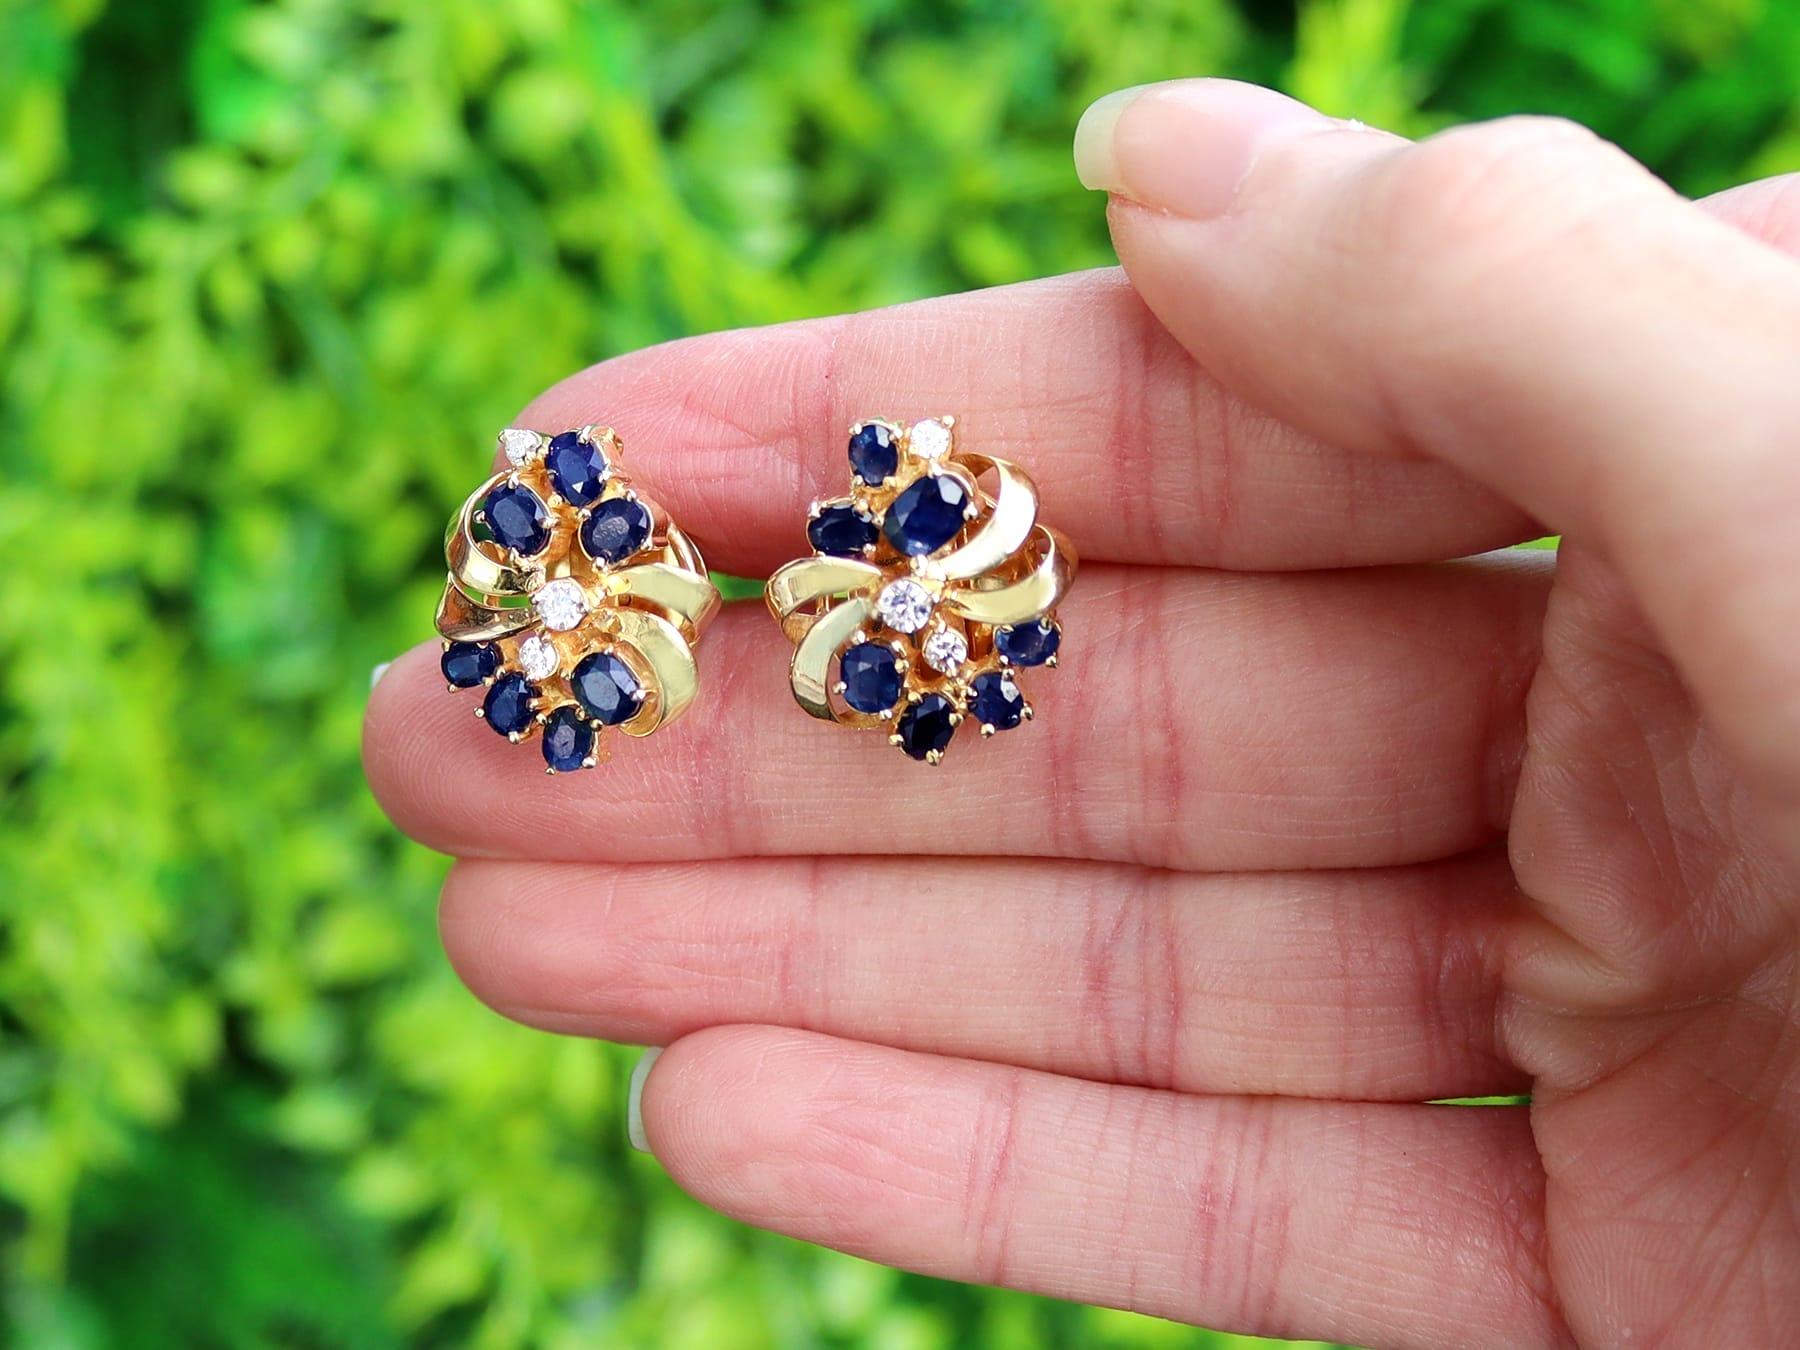 An impressive pair of vintage 2.25 carat sapphire and 0.26 carat diamond, 14 karat yellow gold stud earrings; part of our diverse vintage jewelry and estate jewelry collections.

These fine and impressive vintage sapphire earrings have been crafted